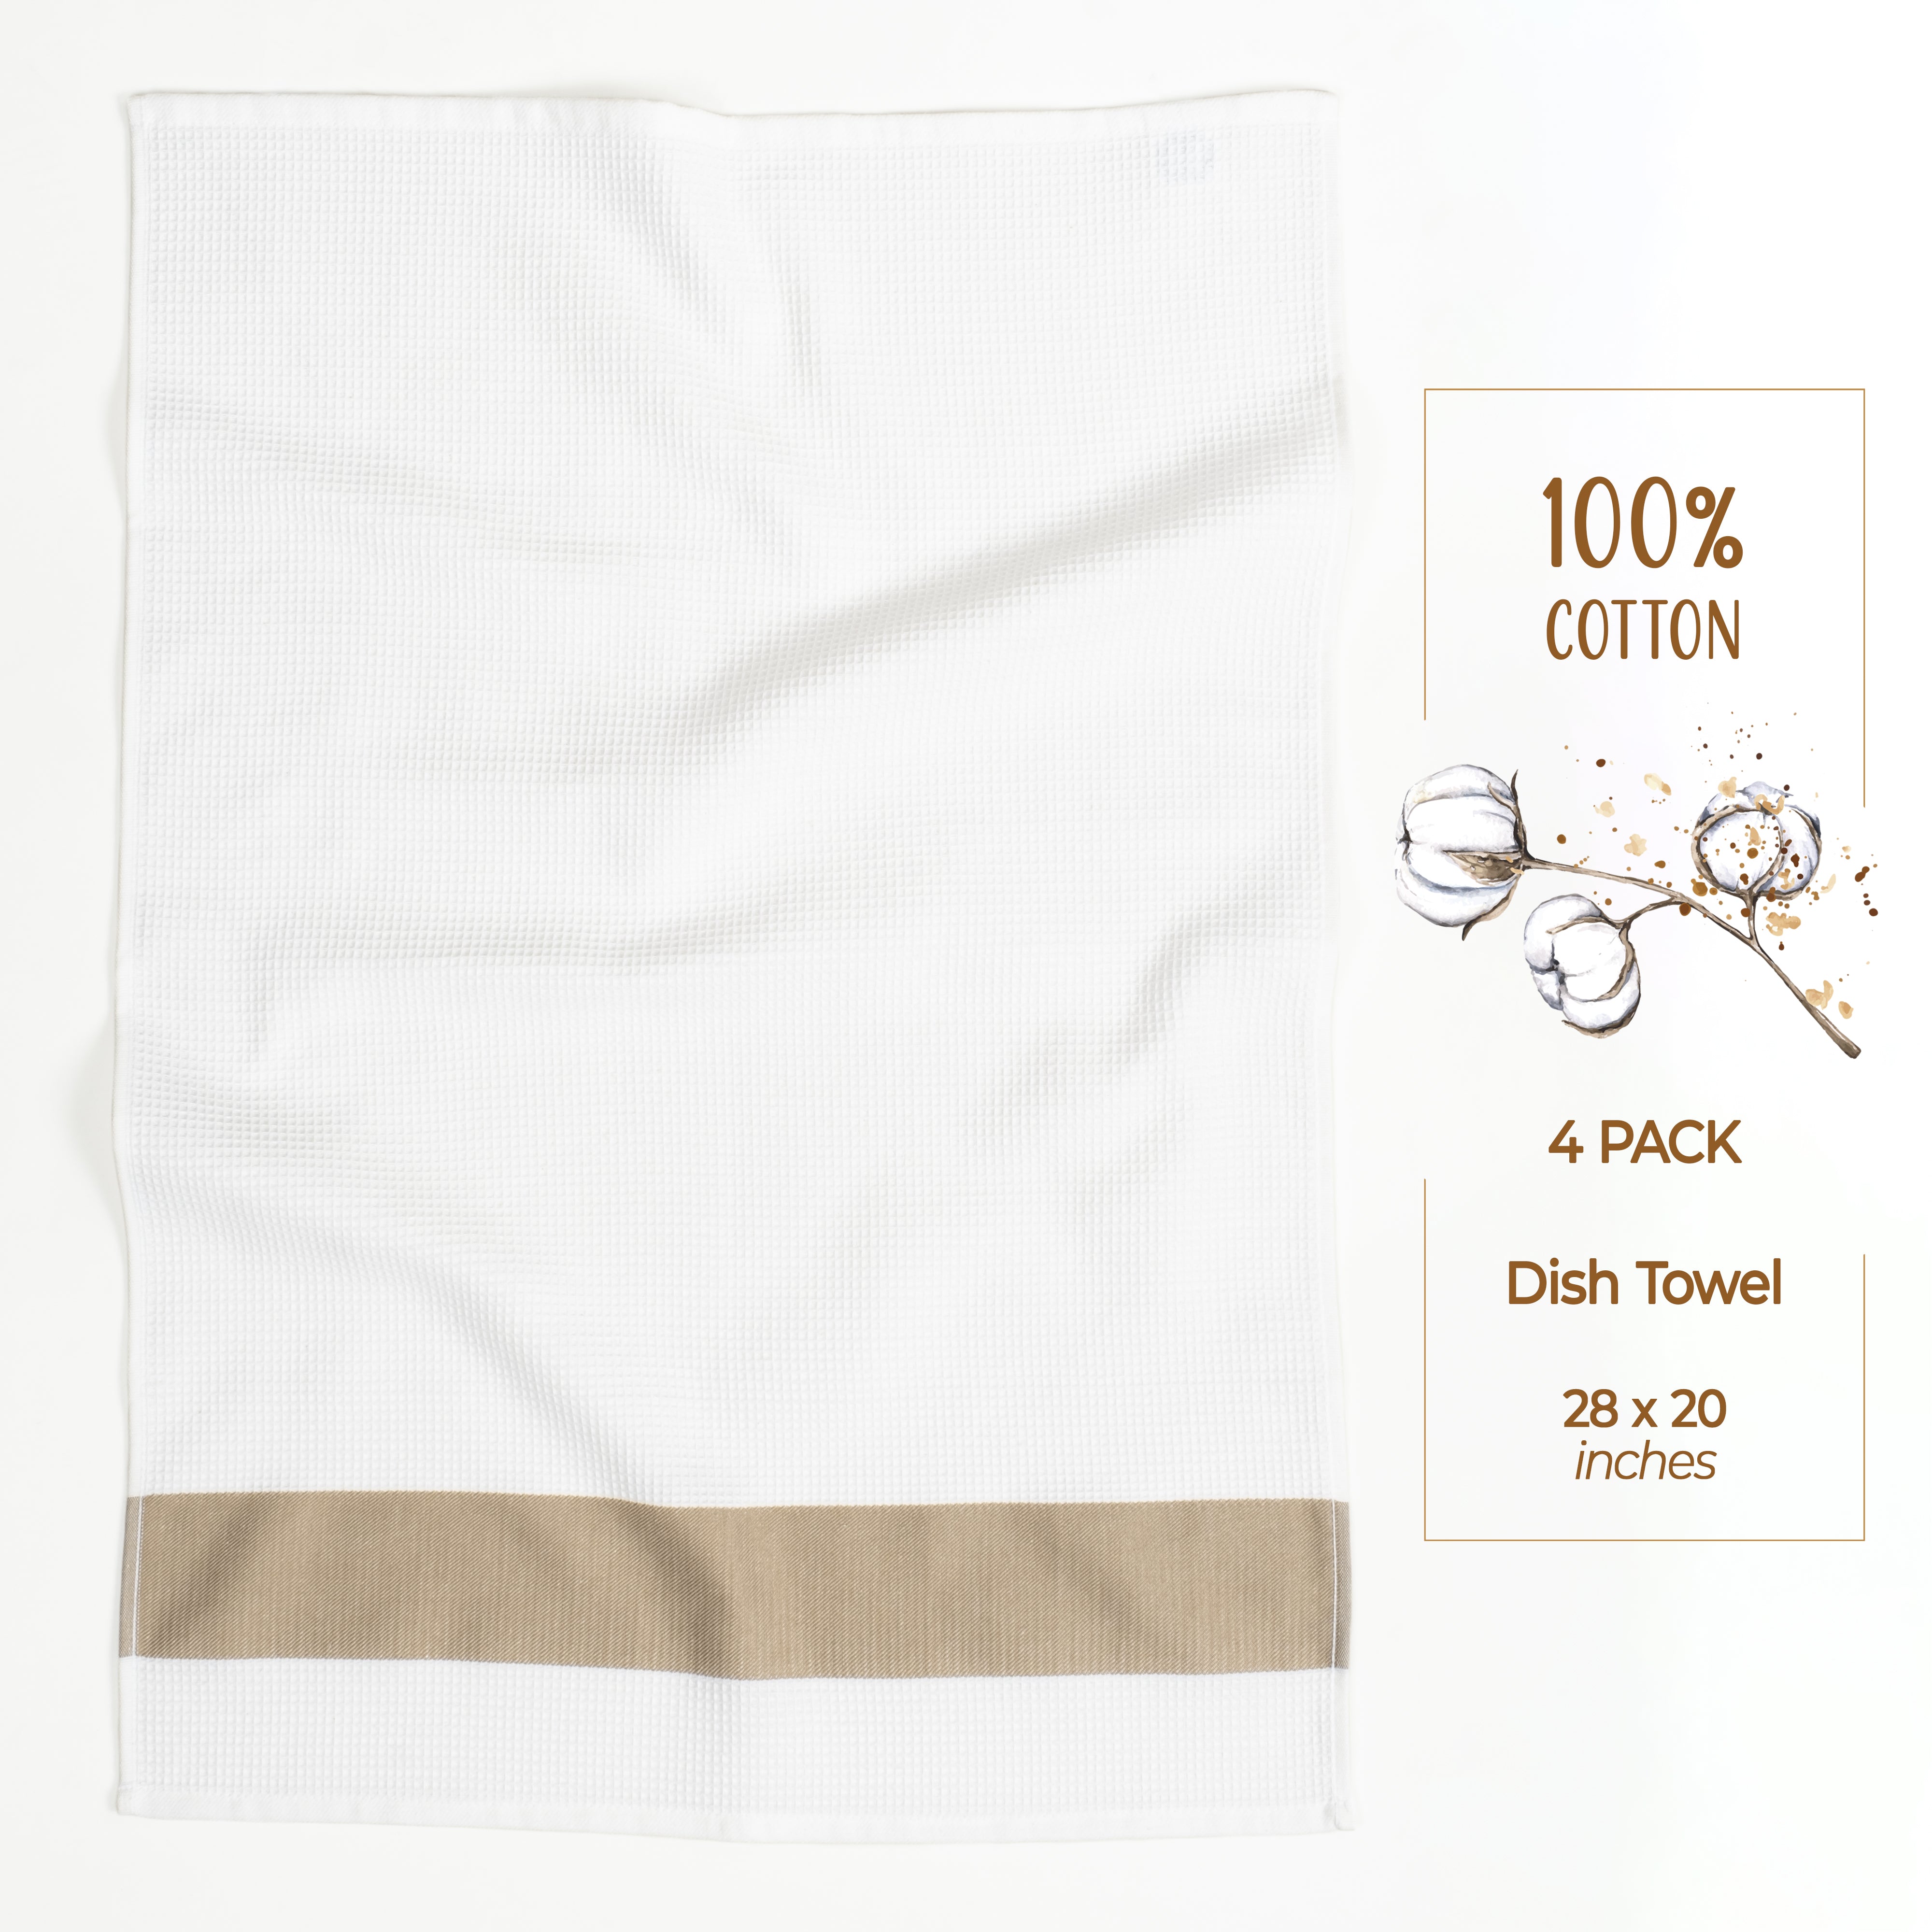 American Soft Linen 4 Packed Dish Towels, 100% Cotton Dish Cloths for Kitchen sand-taupe-3